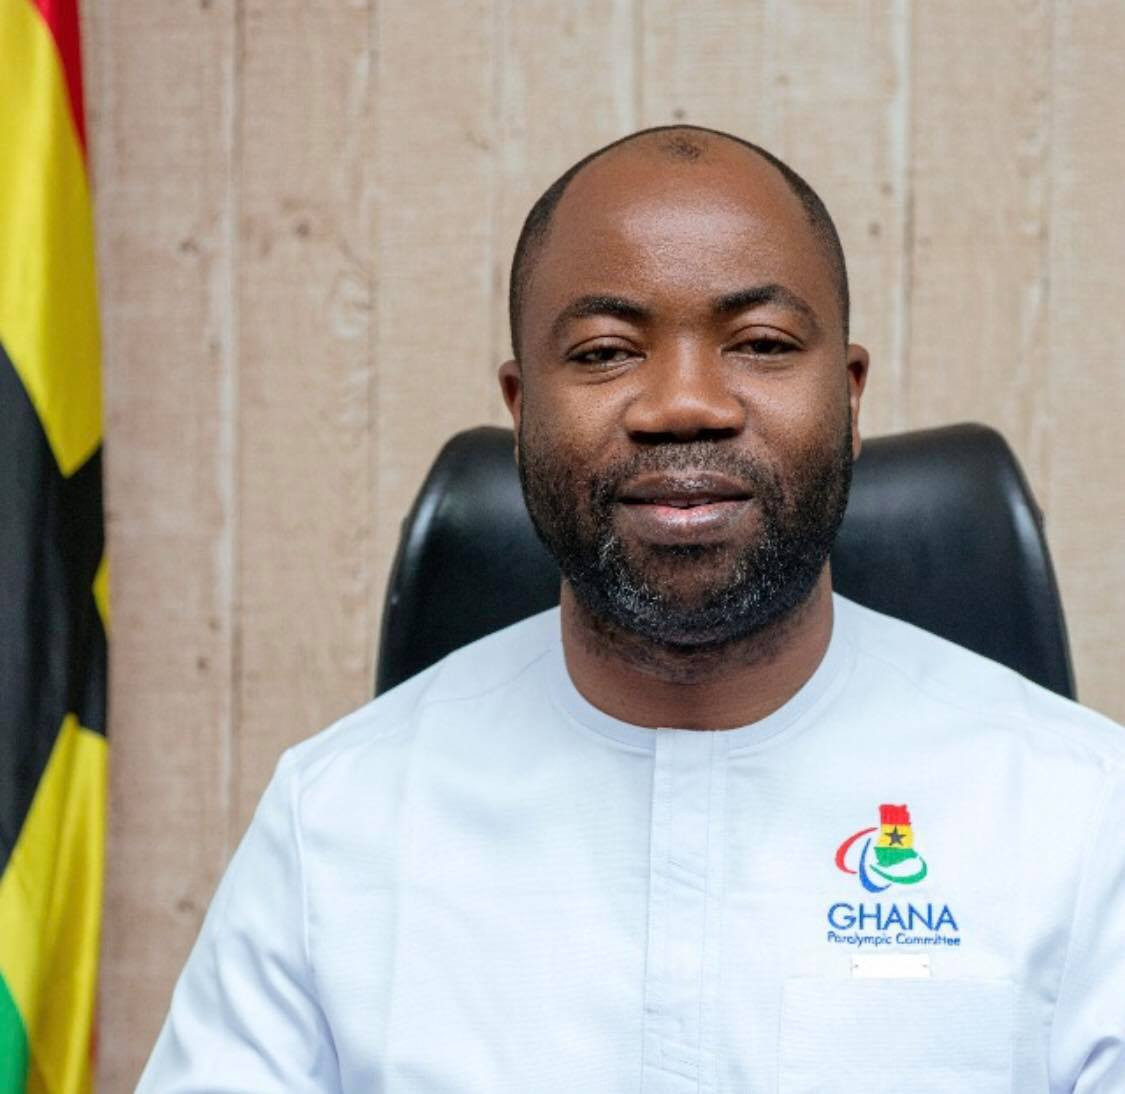 Samson Deen was elected APC President earlier this month ©Ghanaian Paralympic Committee